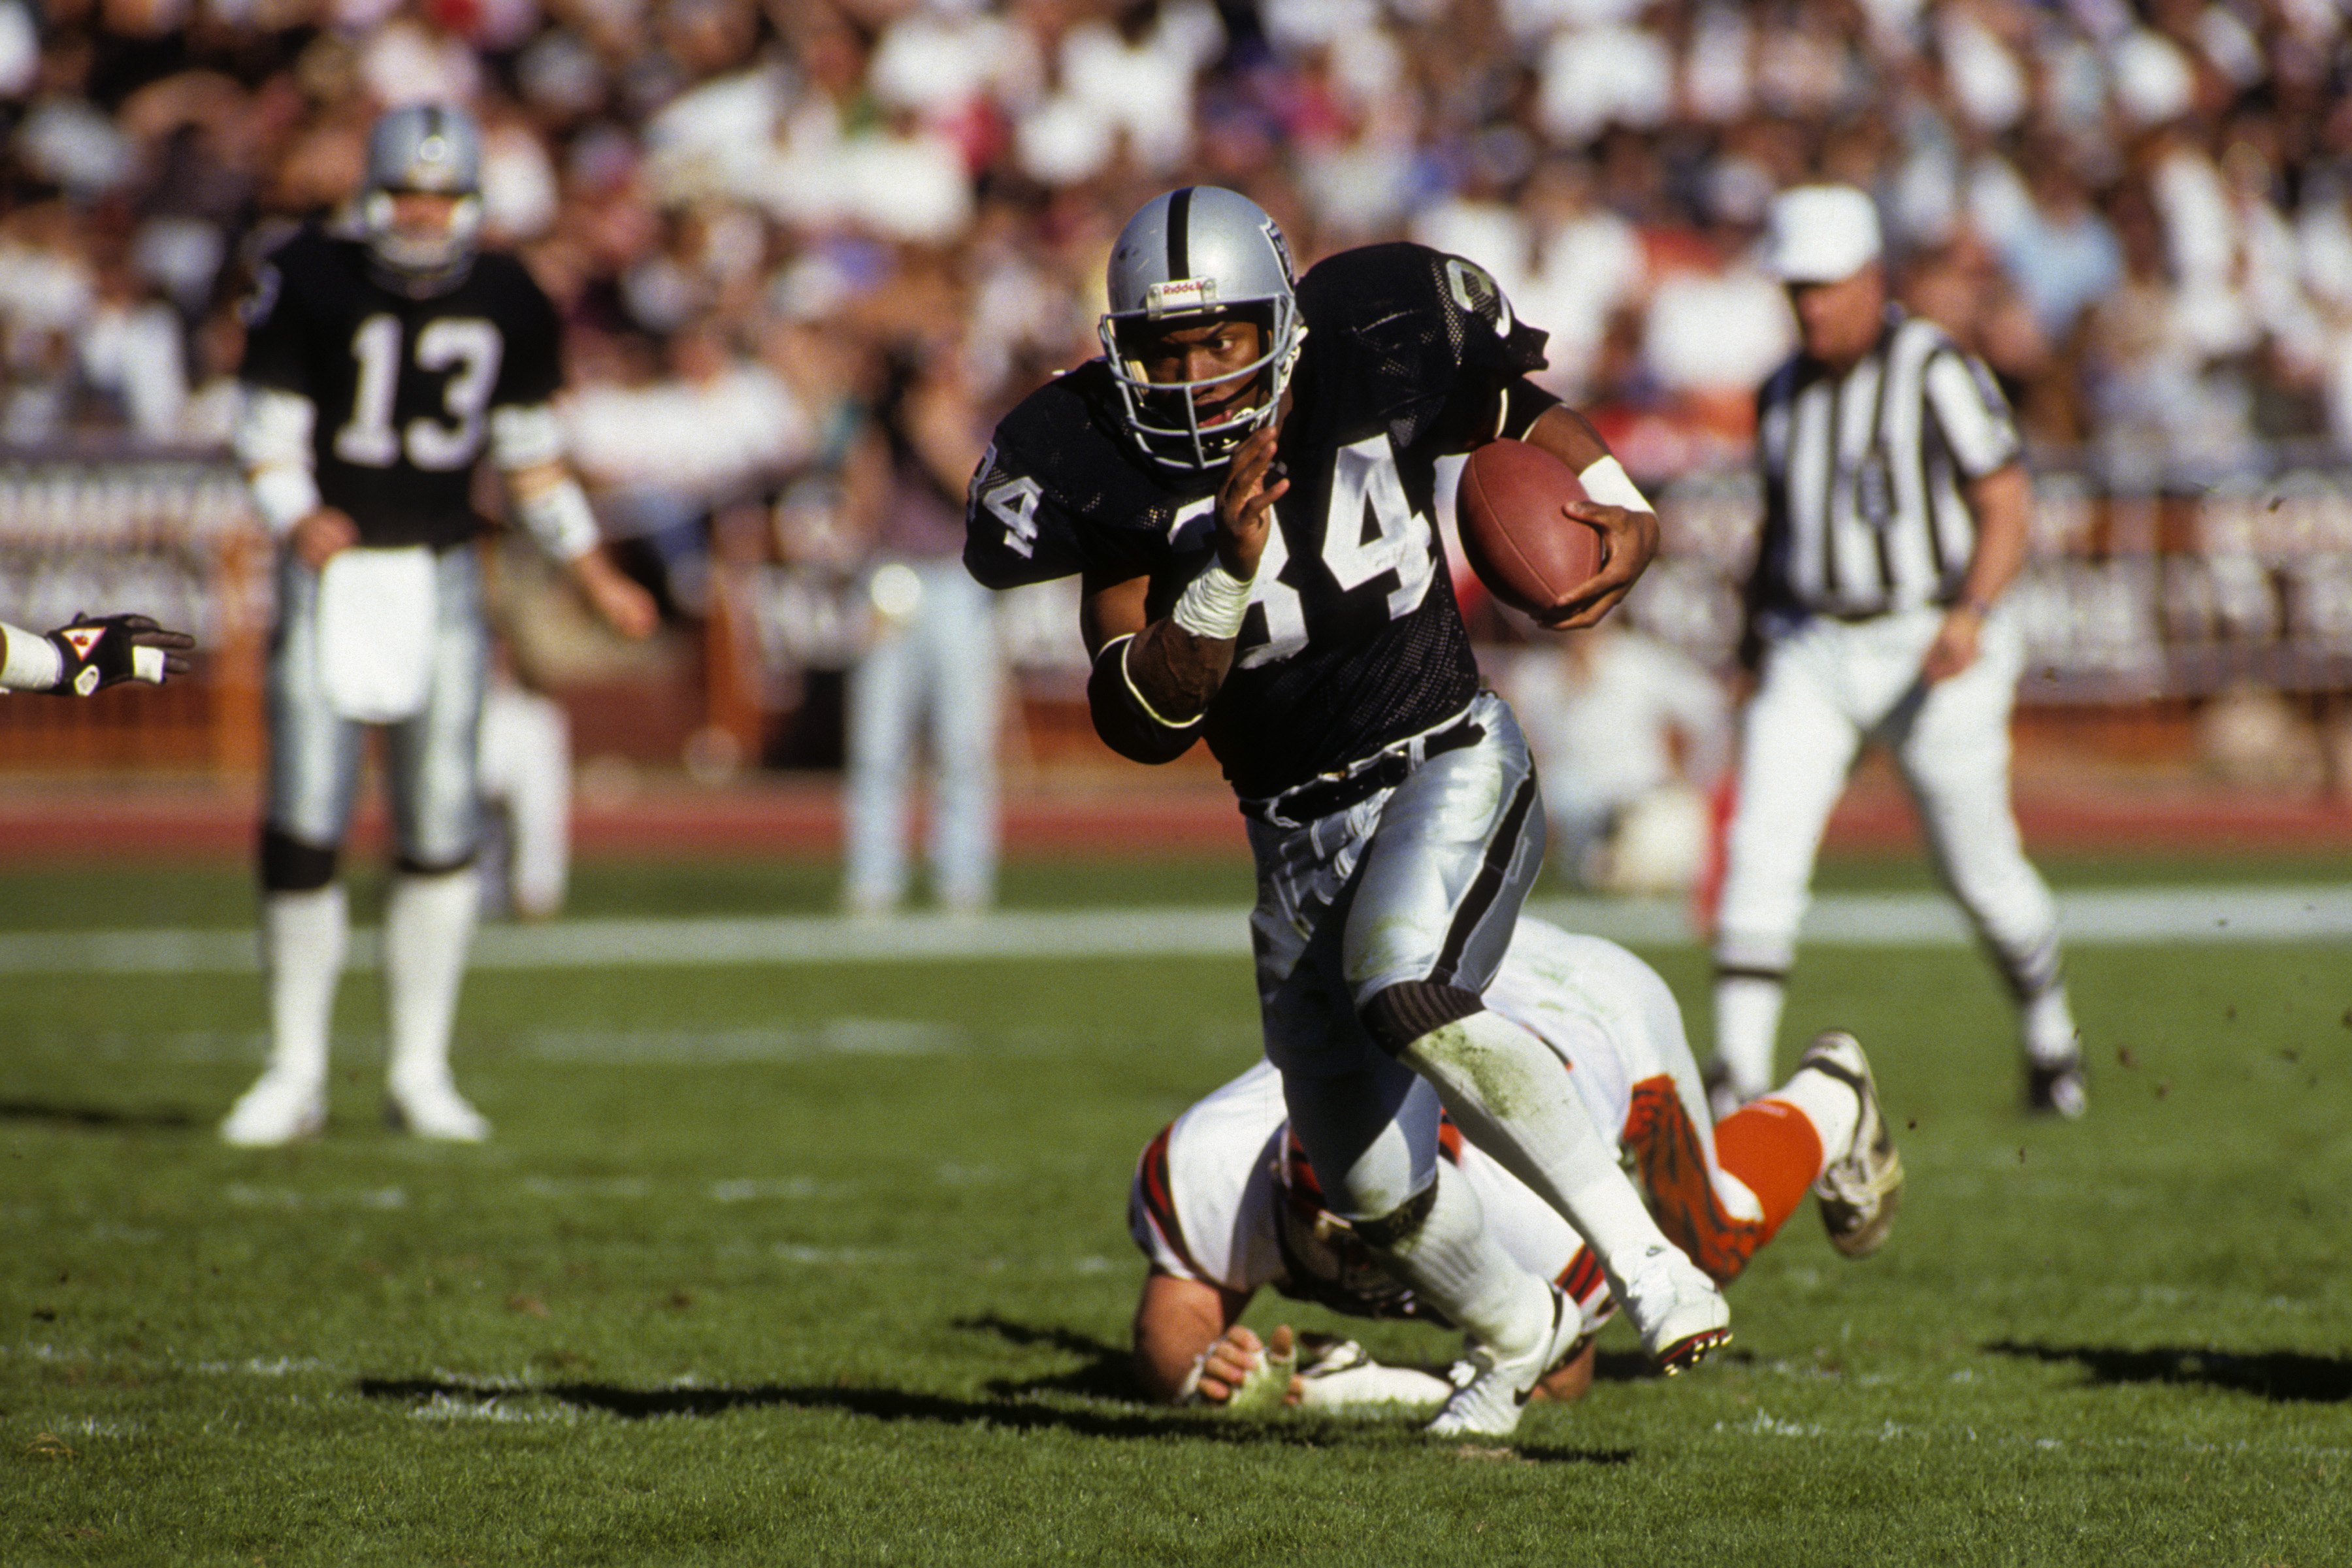 LOS ANGELES - JANUARY 13:  Running back Bo Jackson #34 of Los Angeles Raiders breaks free on the open field against the Cincinnati Bengals defense during the 1990 AFC Divisional Playoffs at the Los Angeles Memorial Coliseum on January 13, 1991 in Los Ange